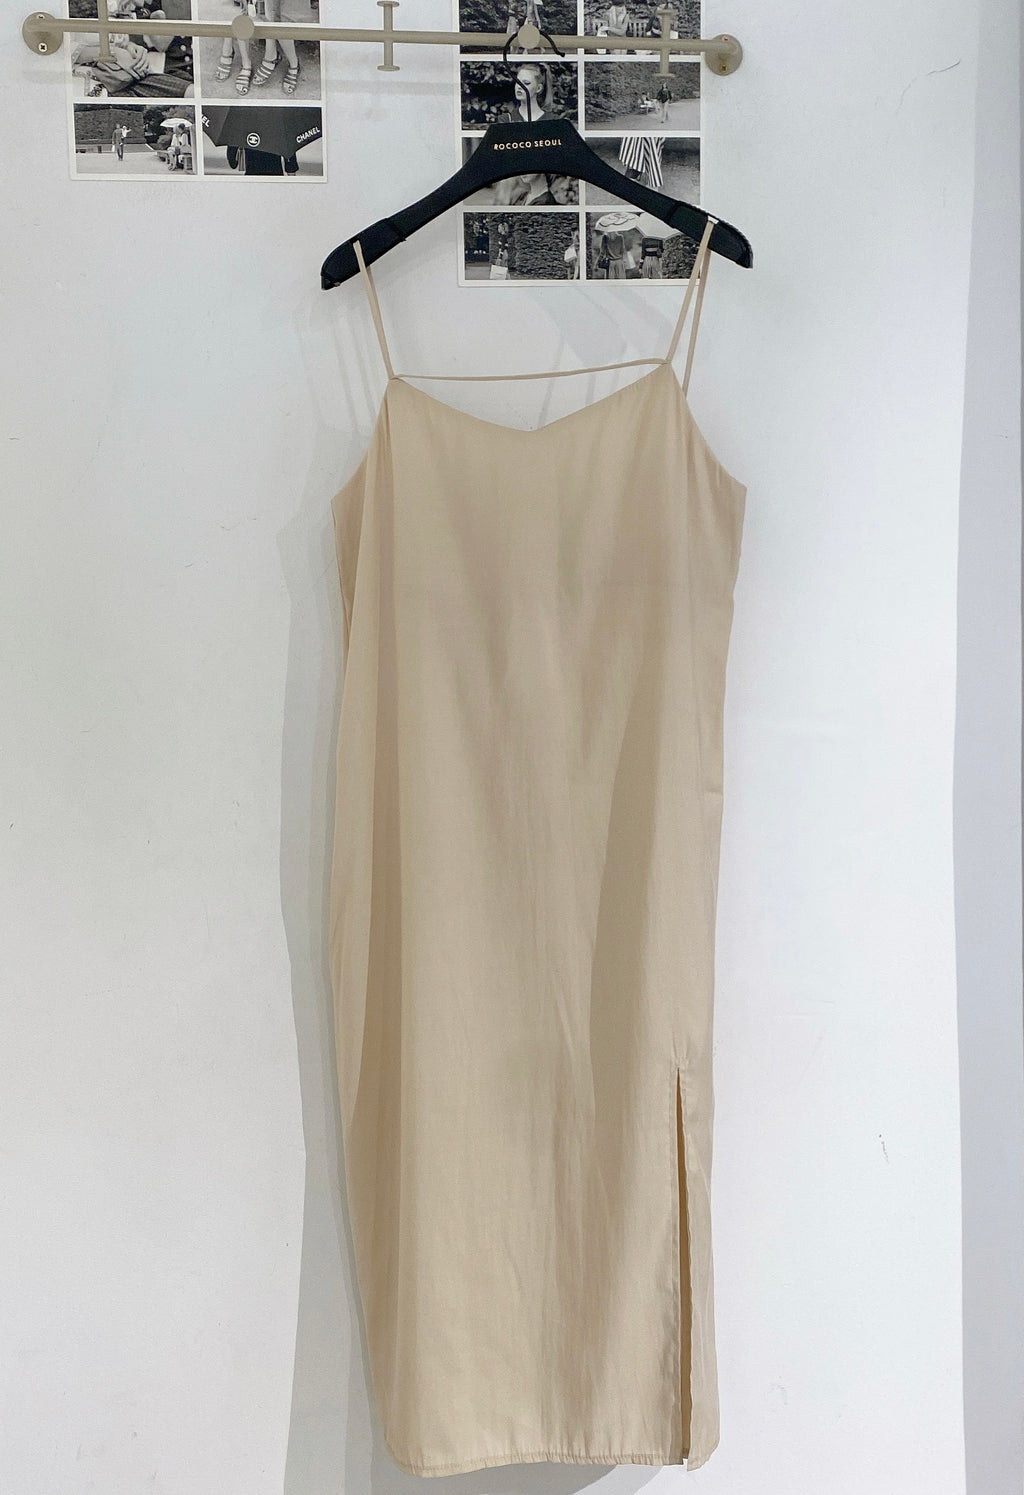 LikeWater Strap Cami Dress